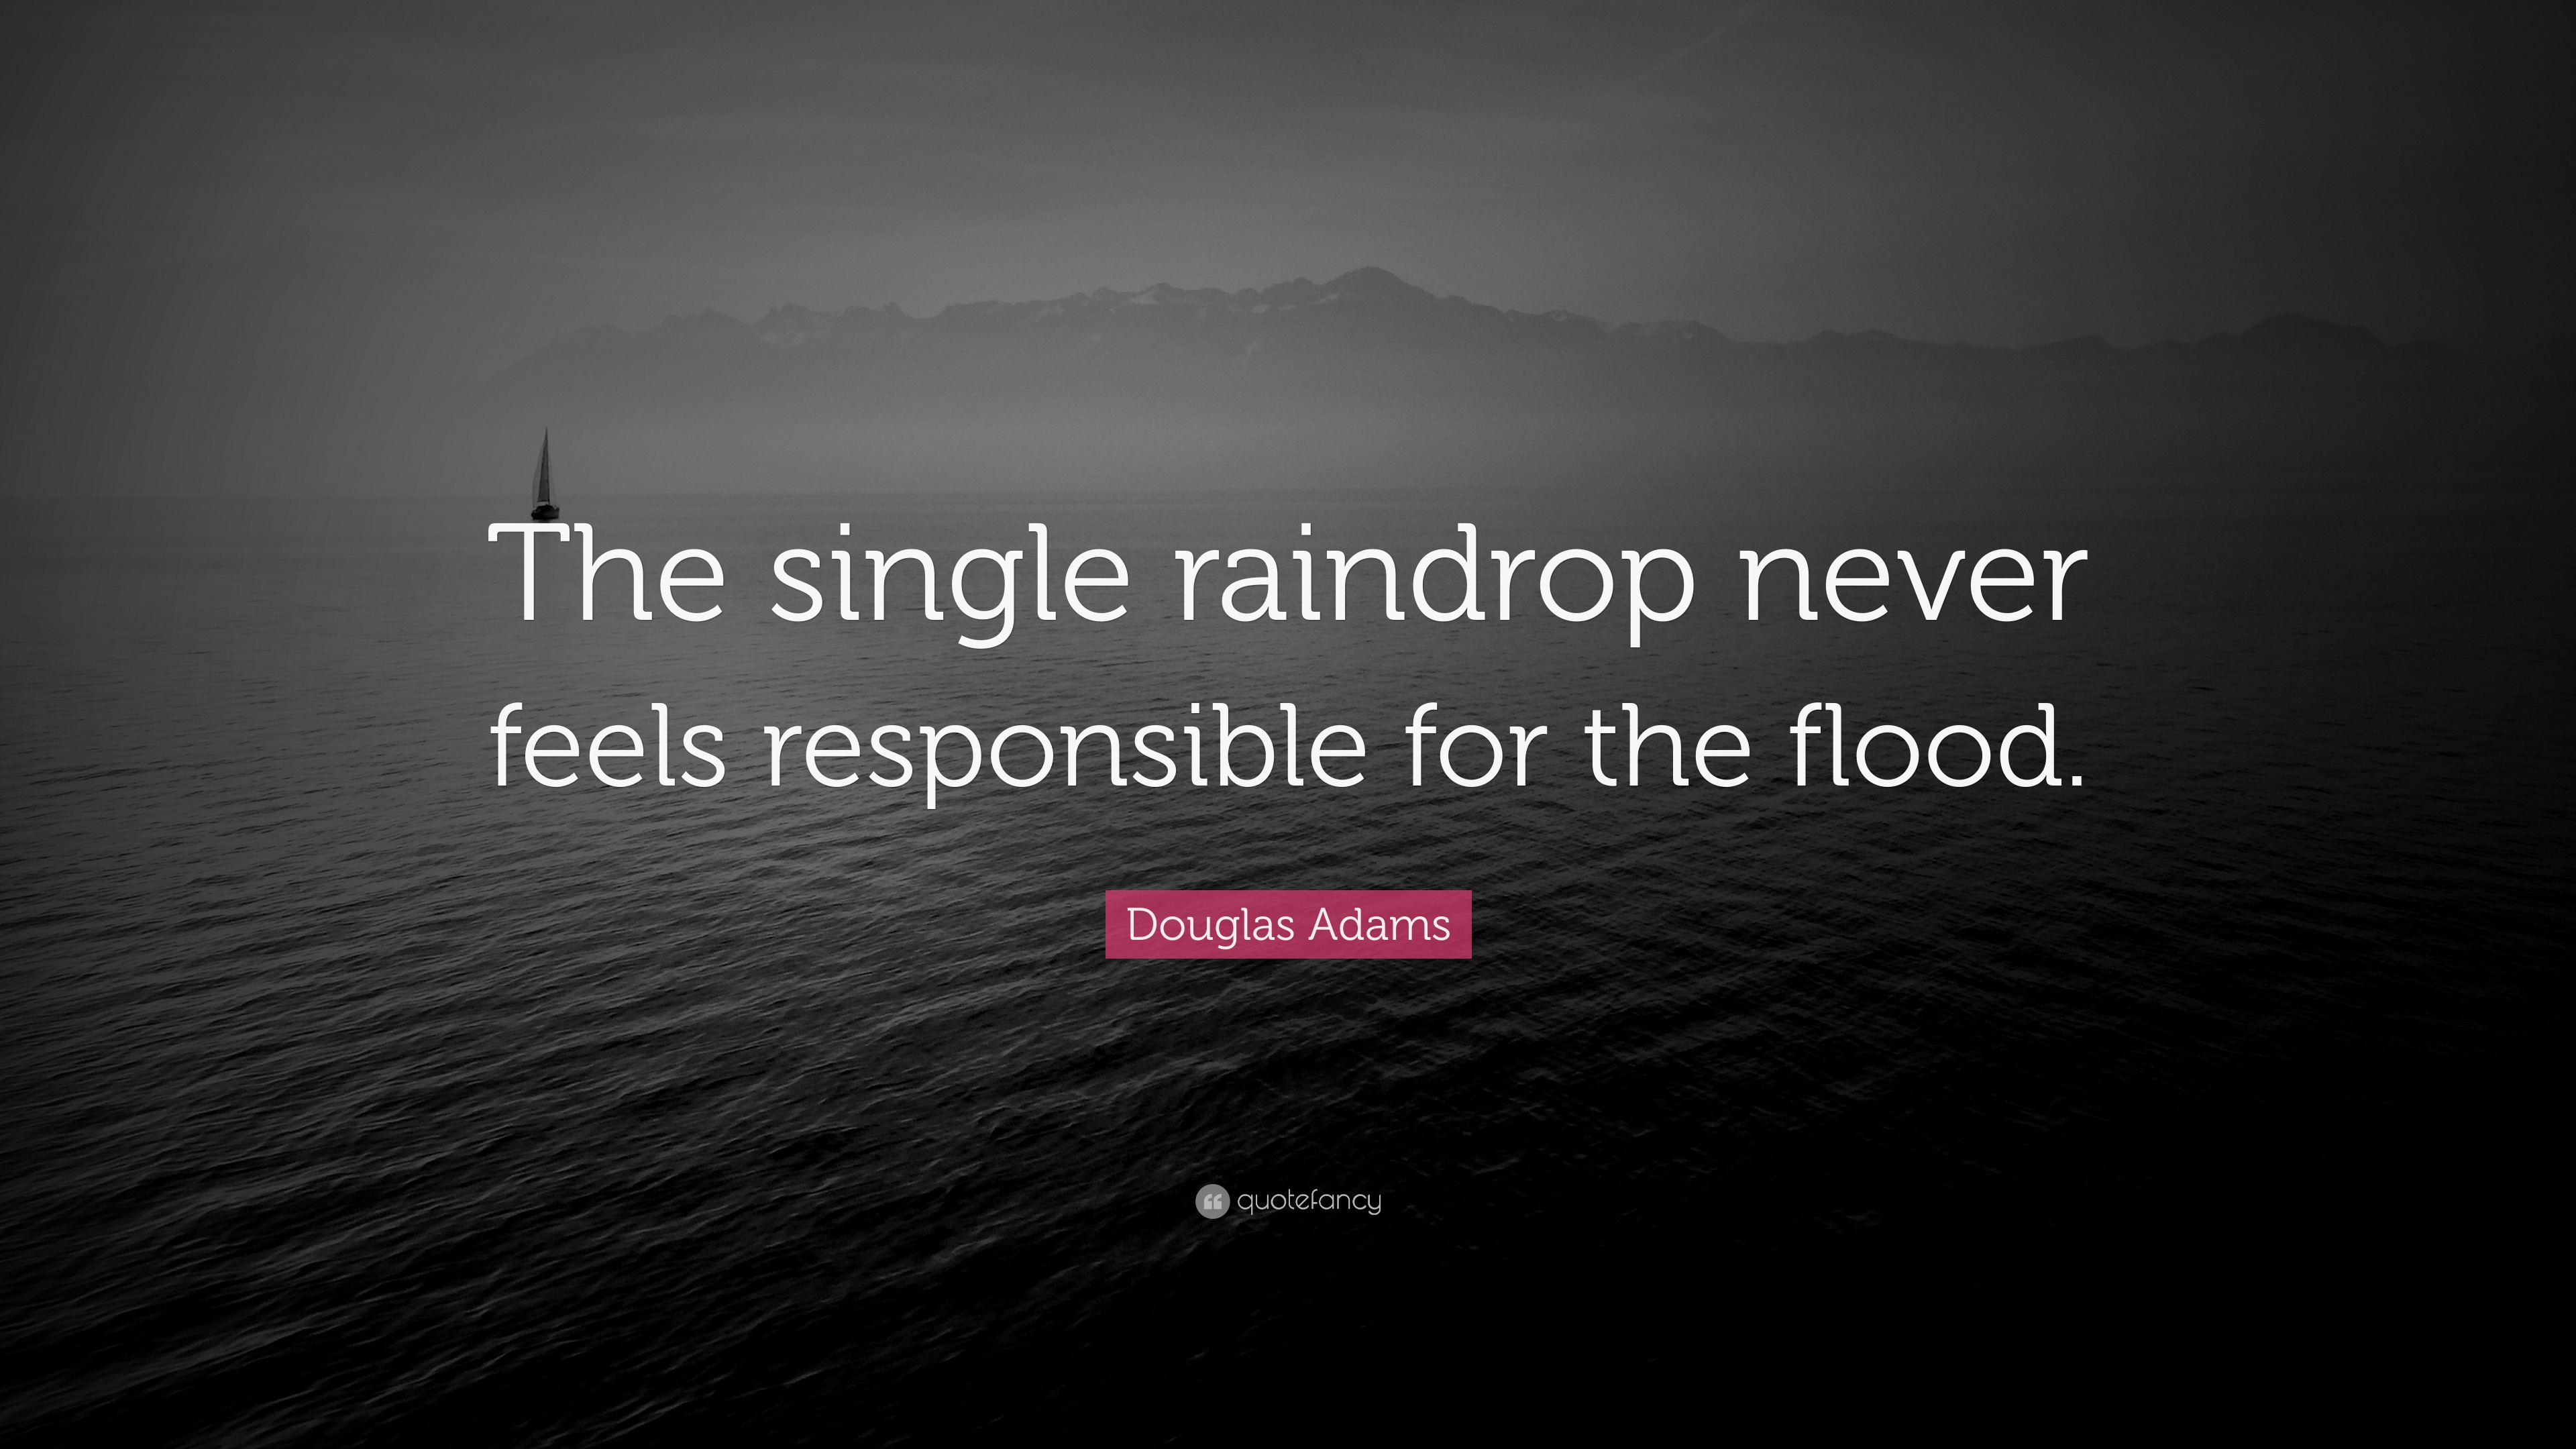 No single raindrop believes it is responsible for the flood